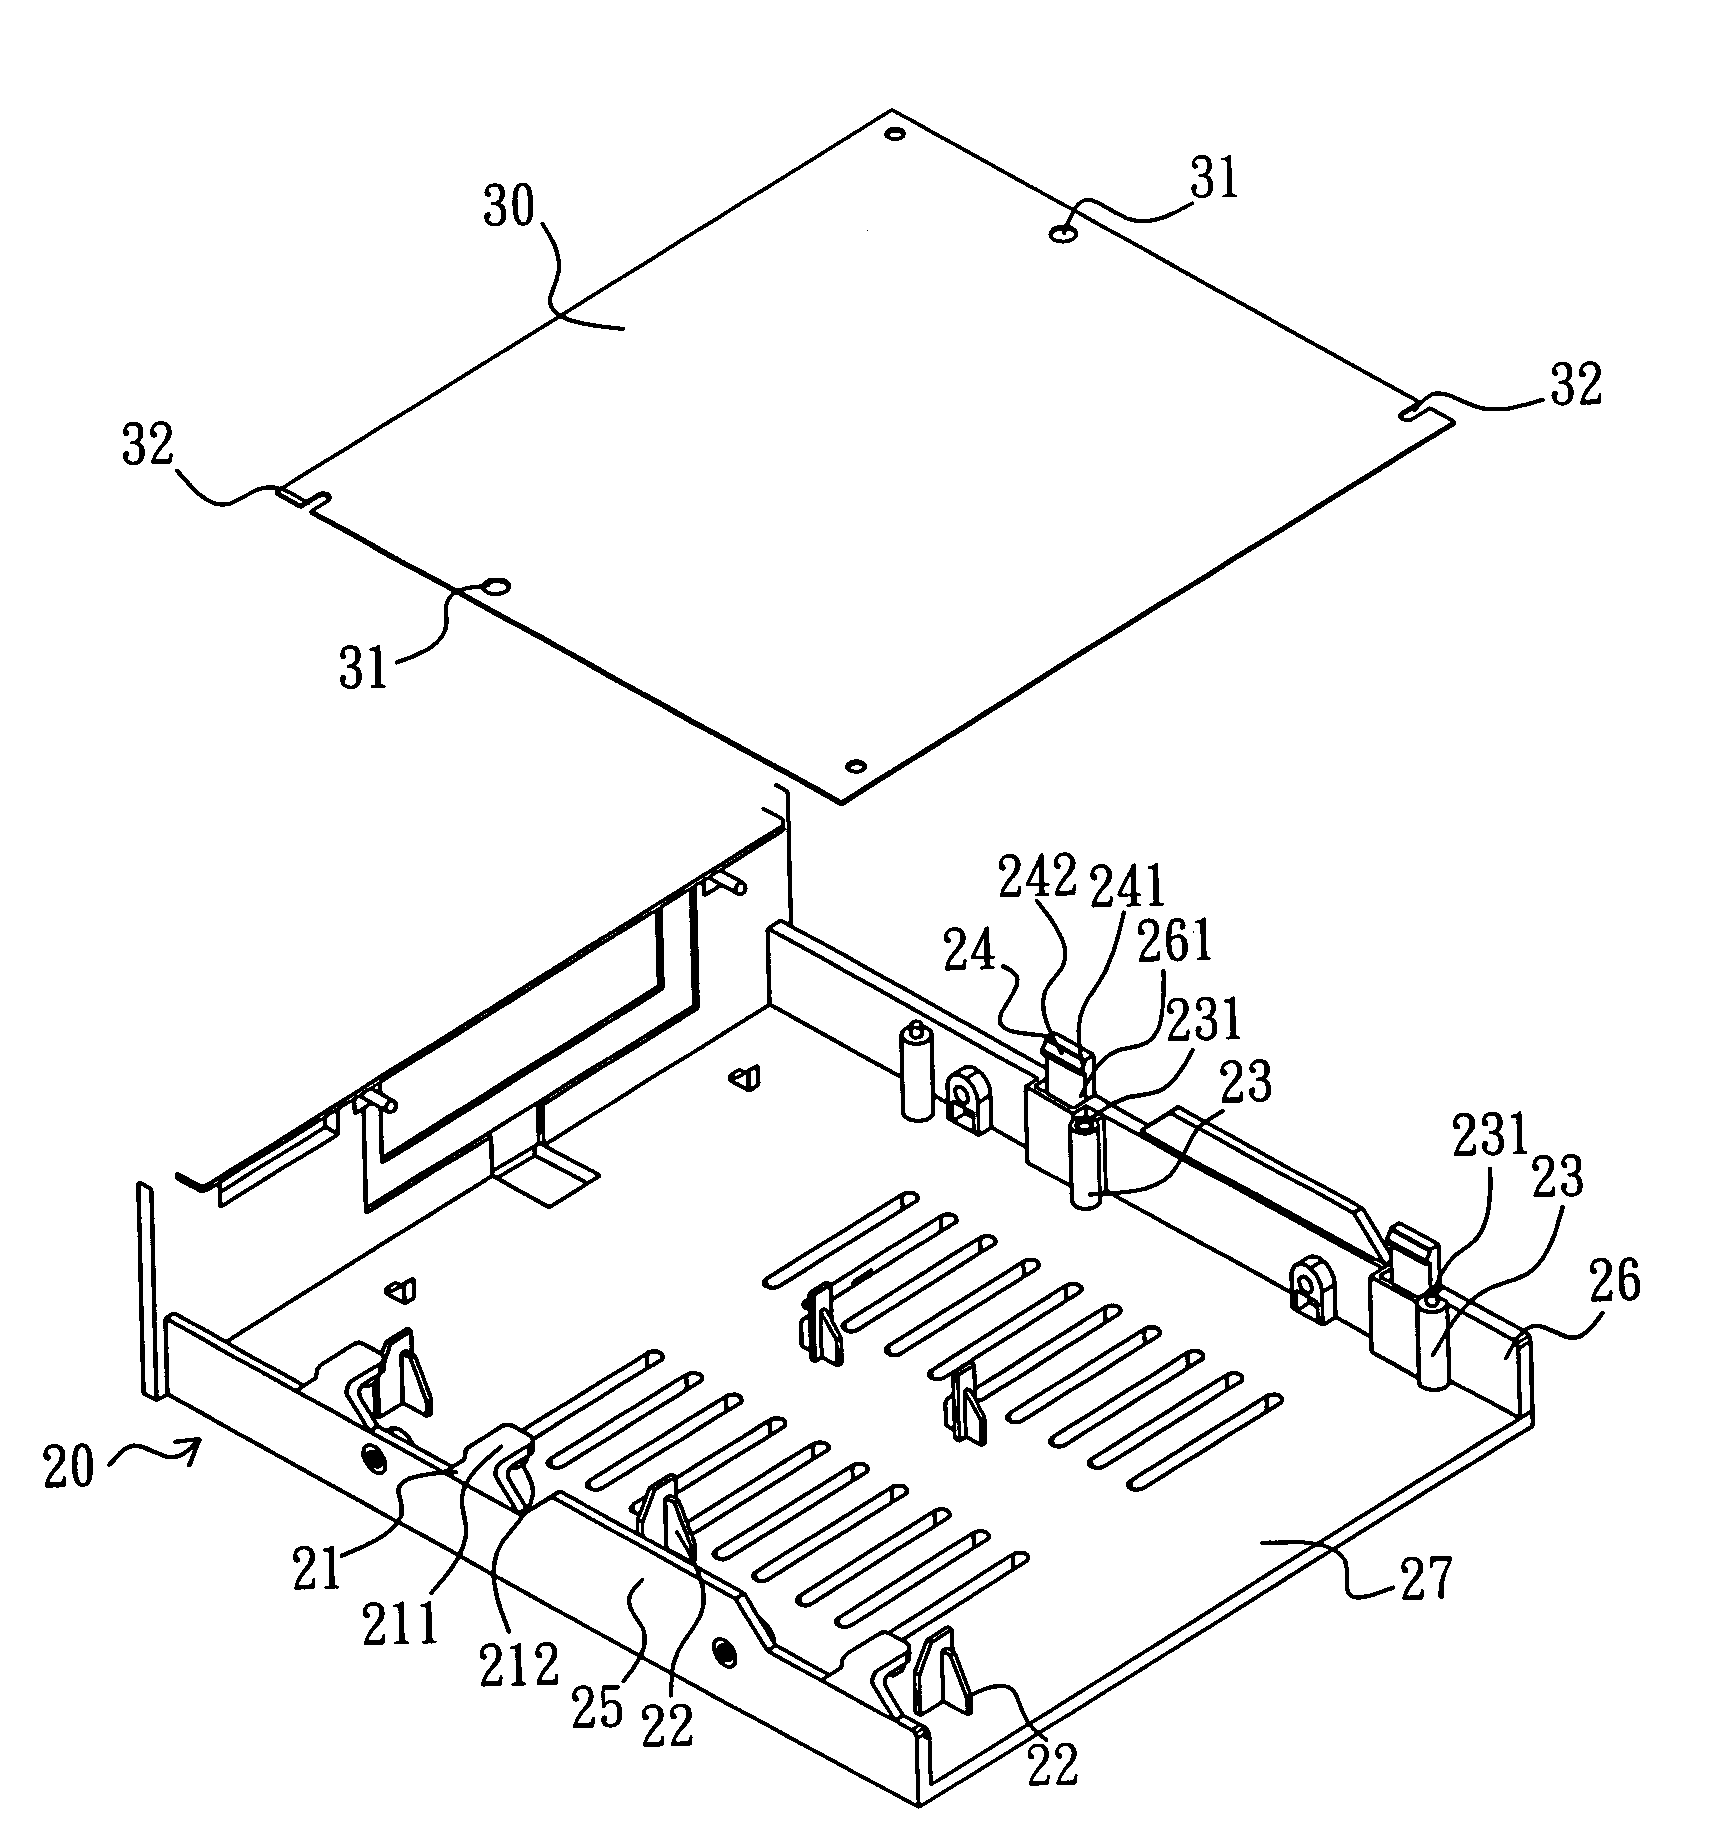 Structure for combining printing circuit board with rack